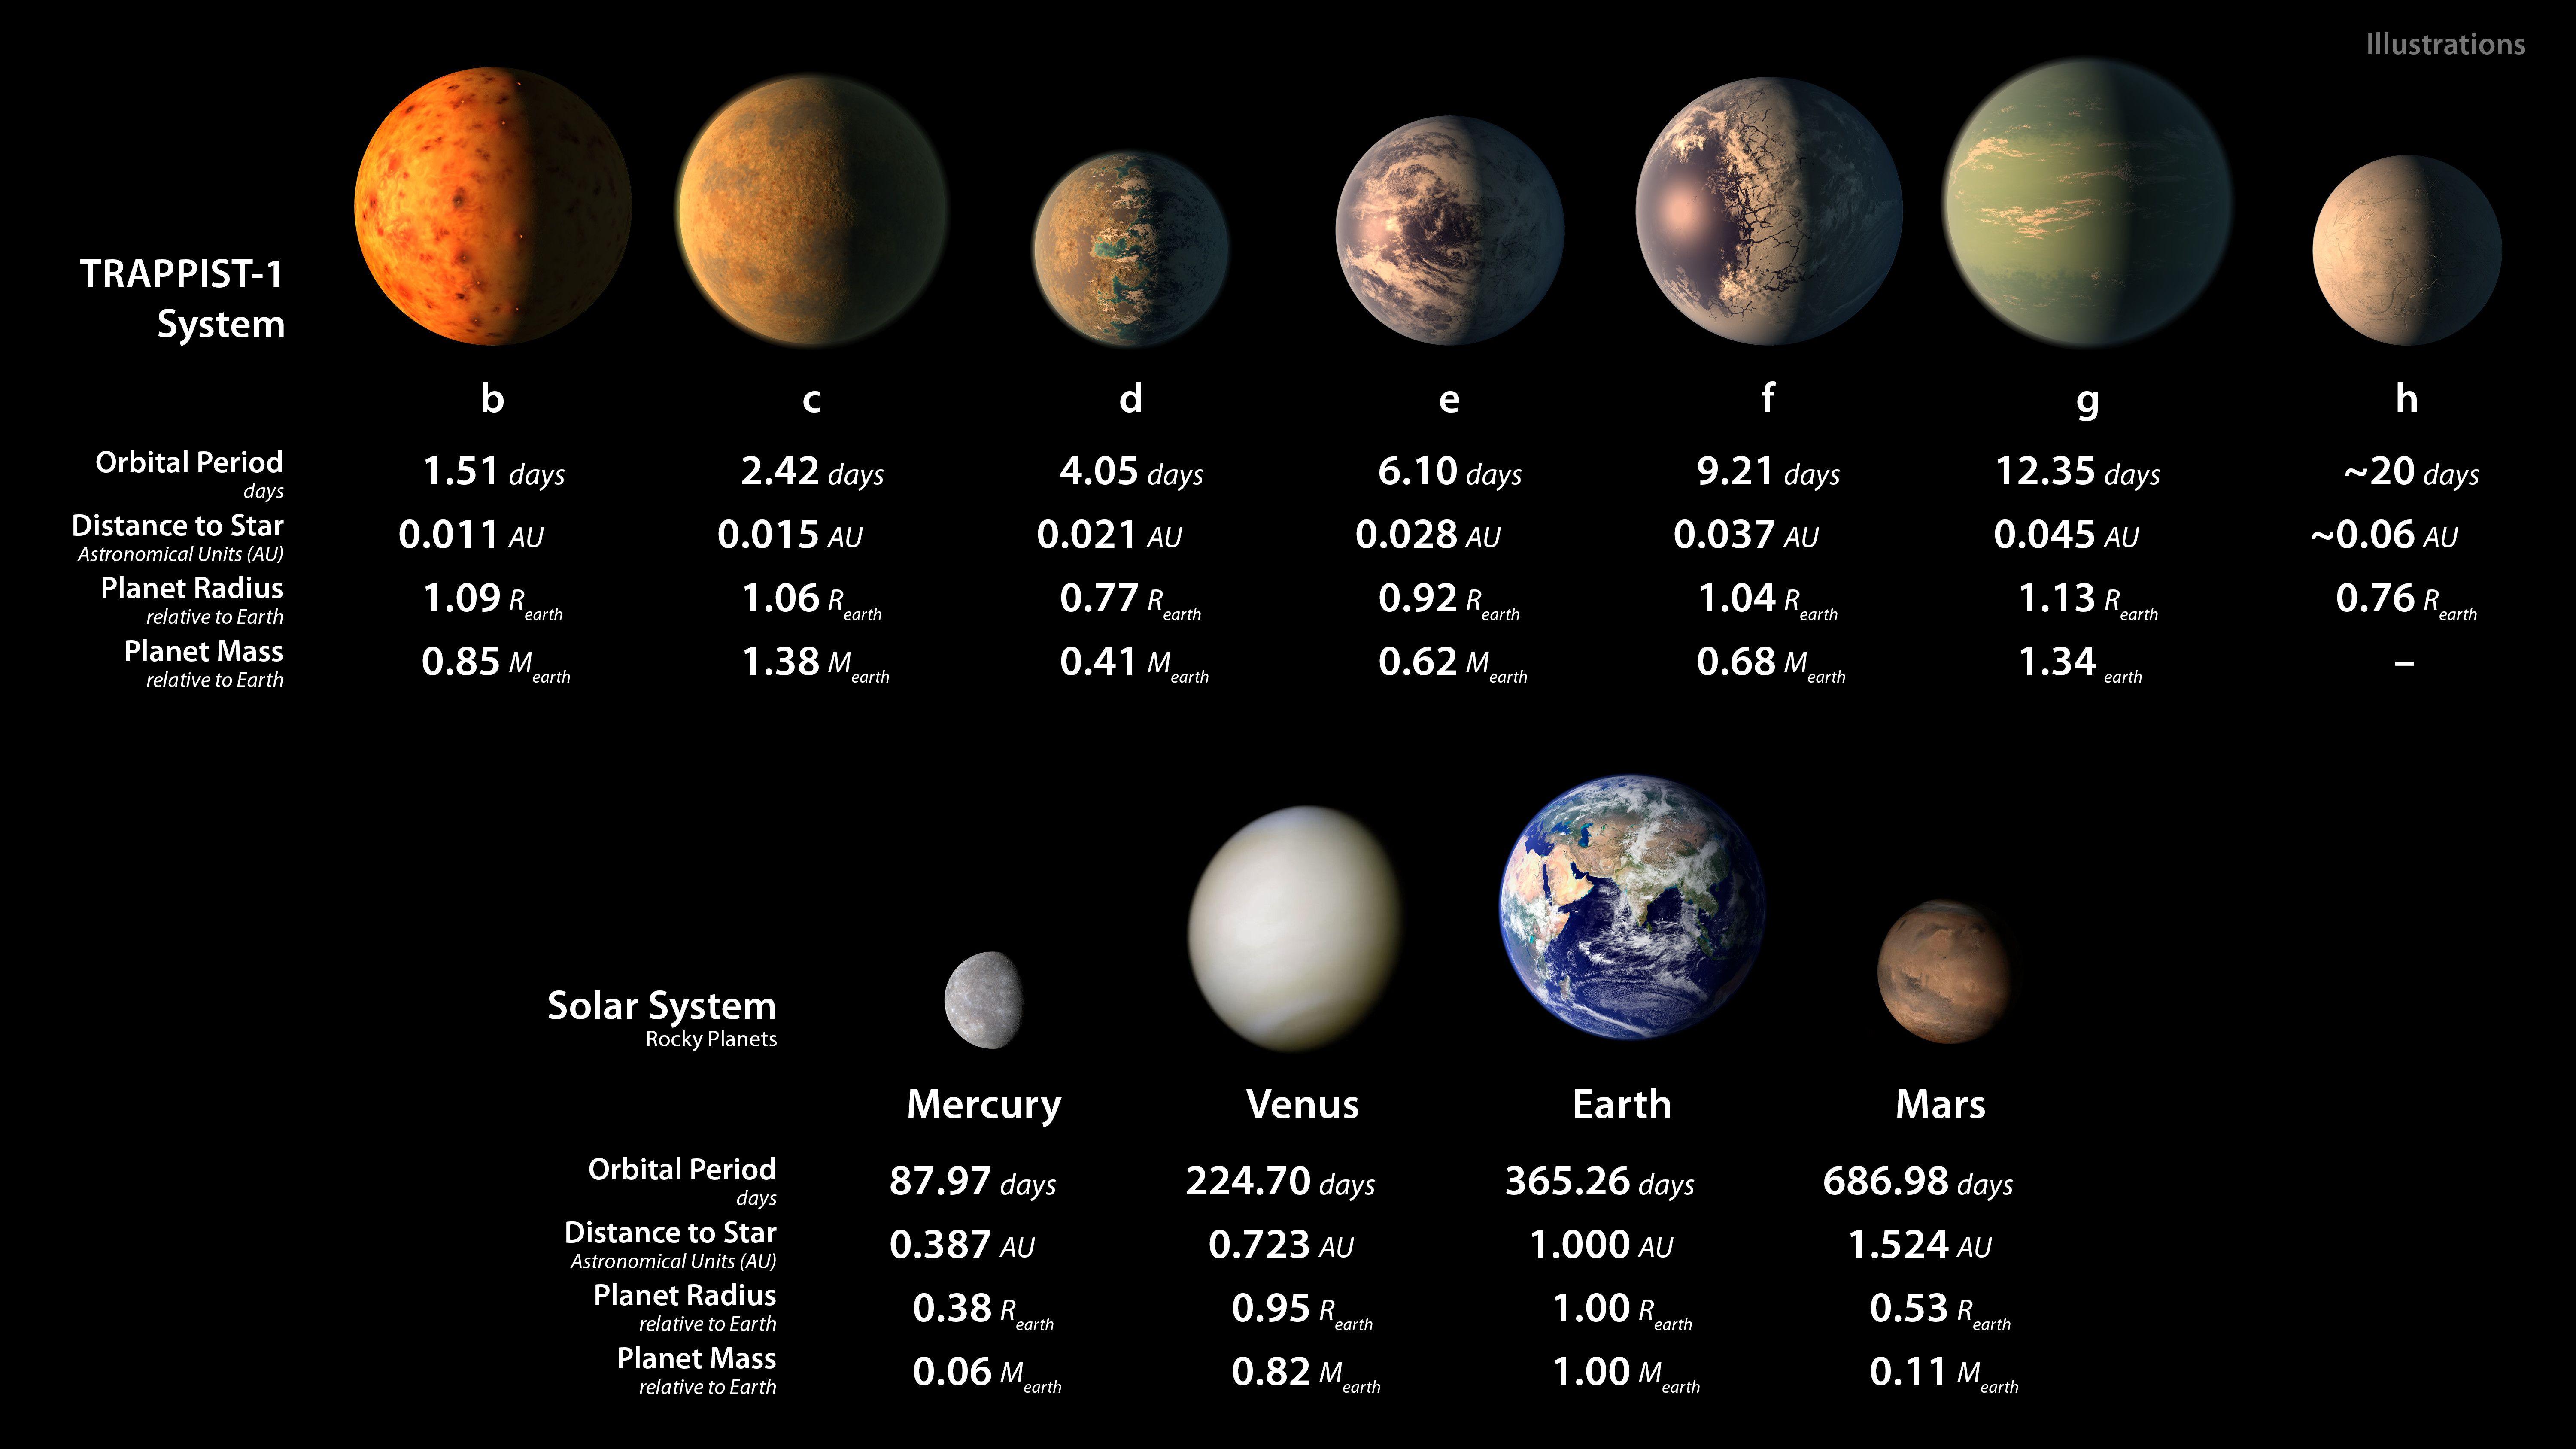 Image Archive: Exoplanets